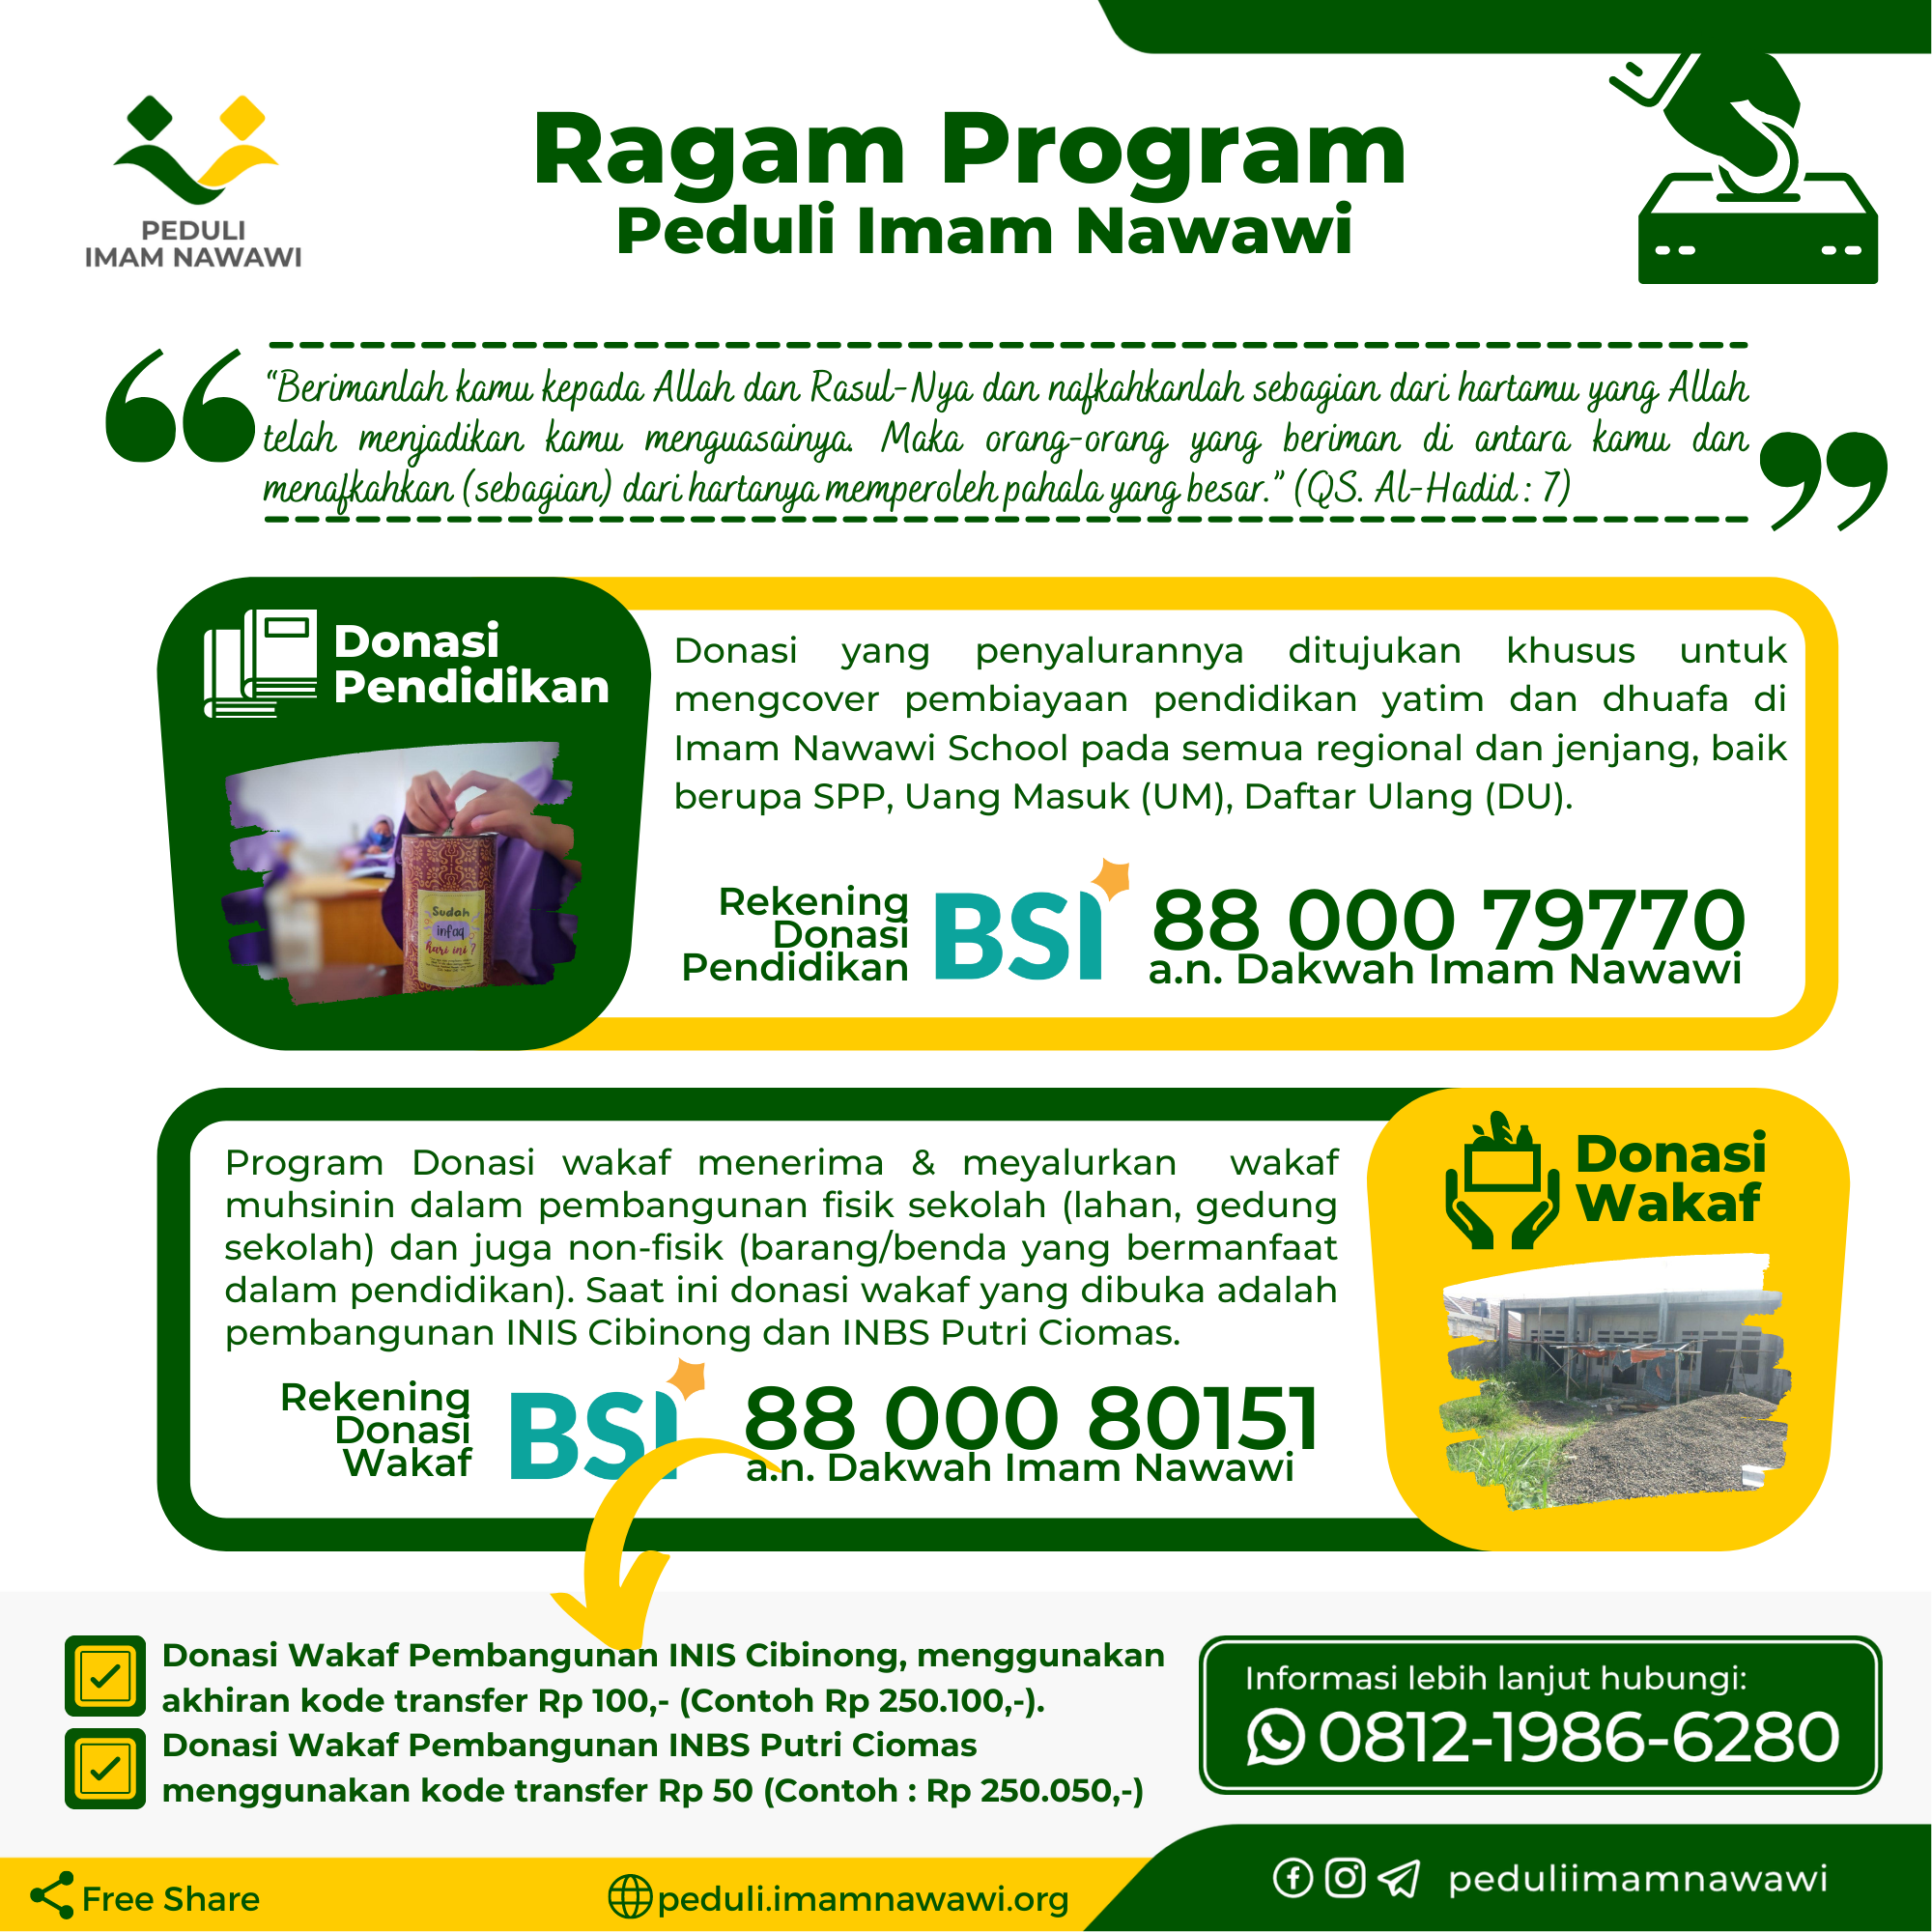 You are currently viewing Poster Ragam Program Peduli Imam Nawawi